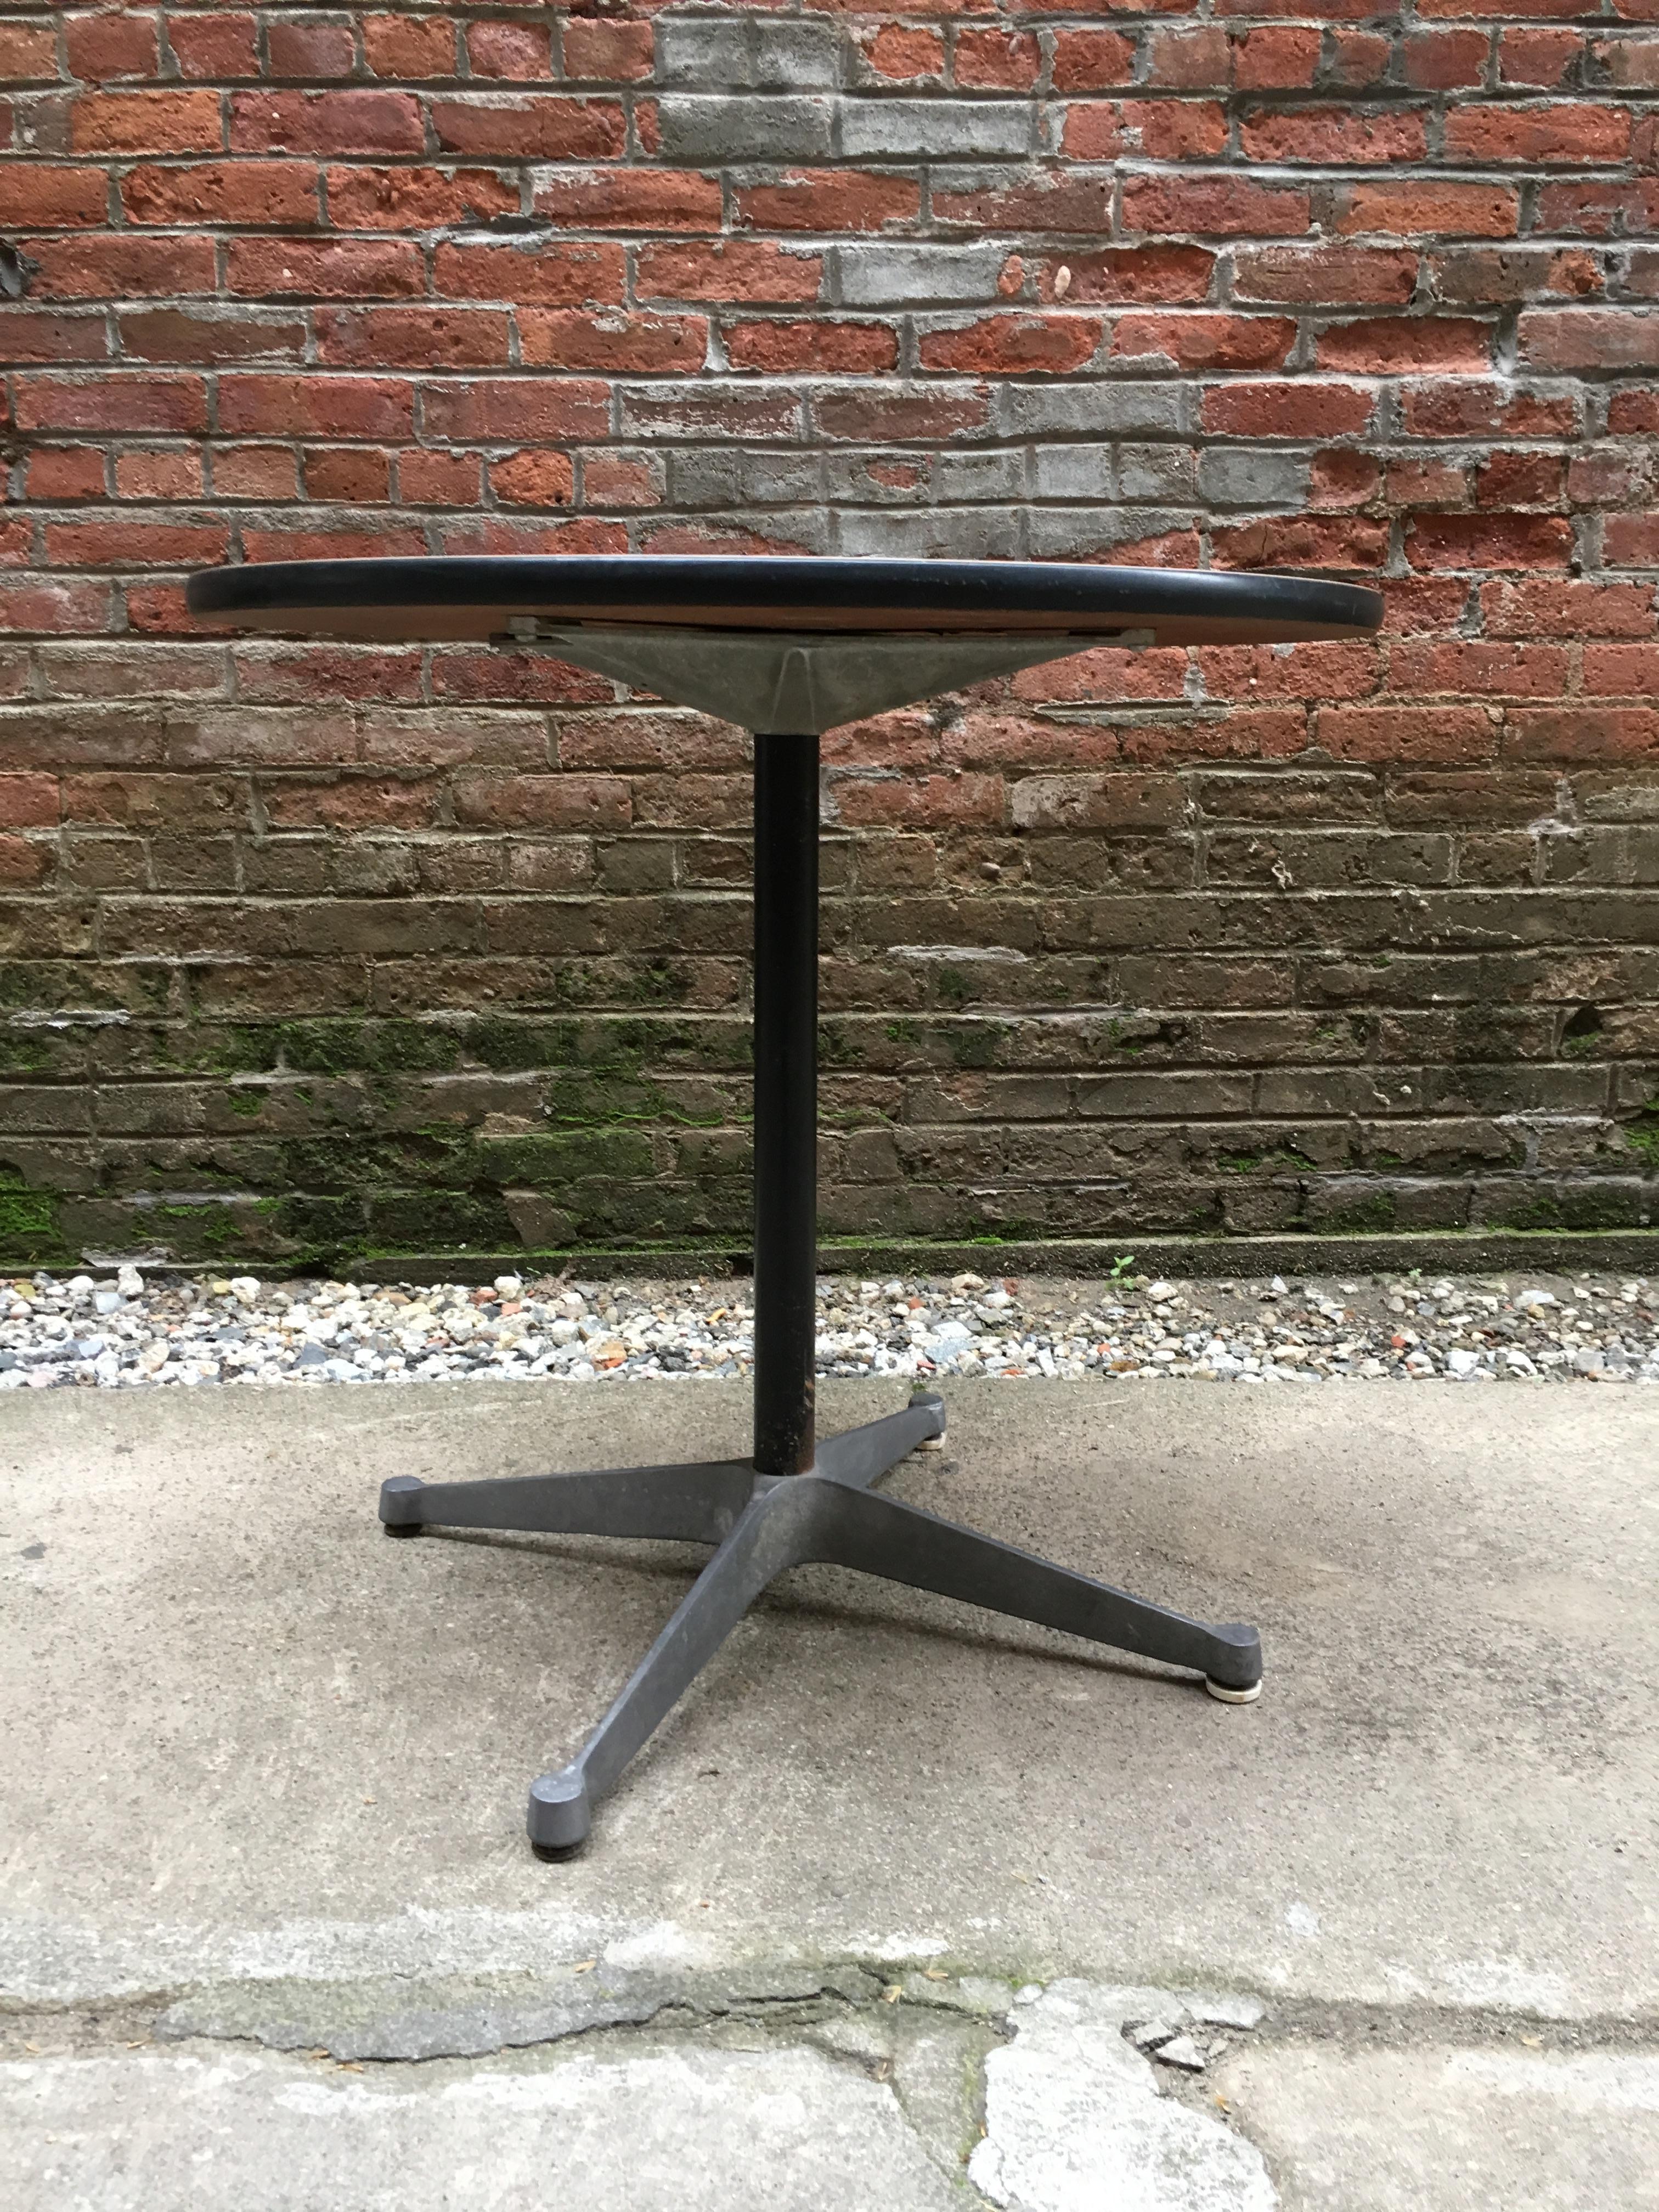 Early and good Charles Eames design for Herman Miller. White laminate top with black shaft aluminum legs and base. Good overall condition, circa 1955-1958.

Measures: 28.5